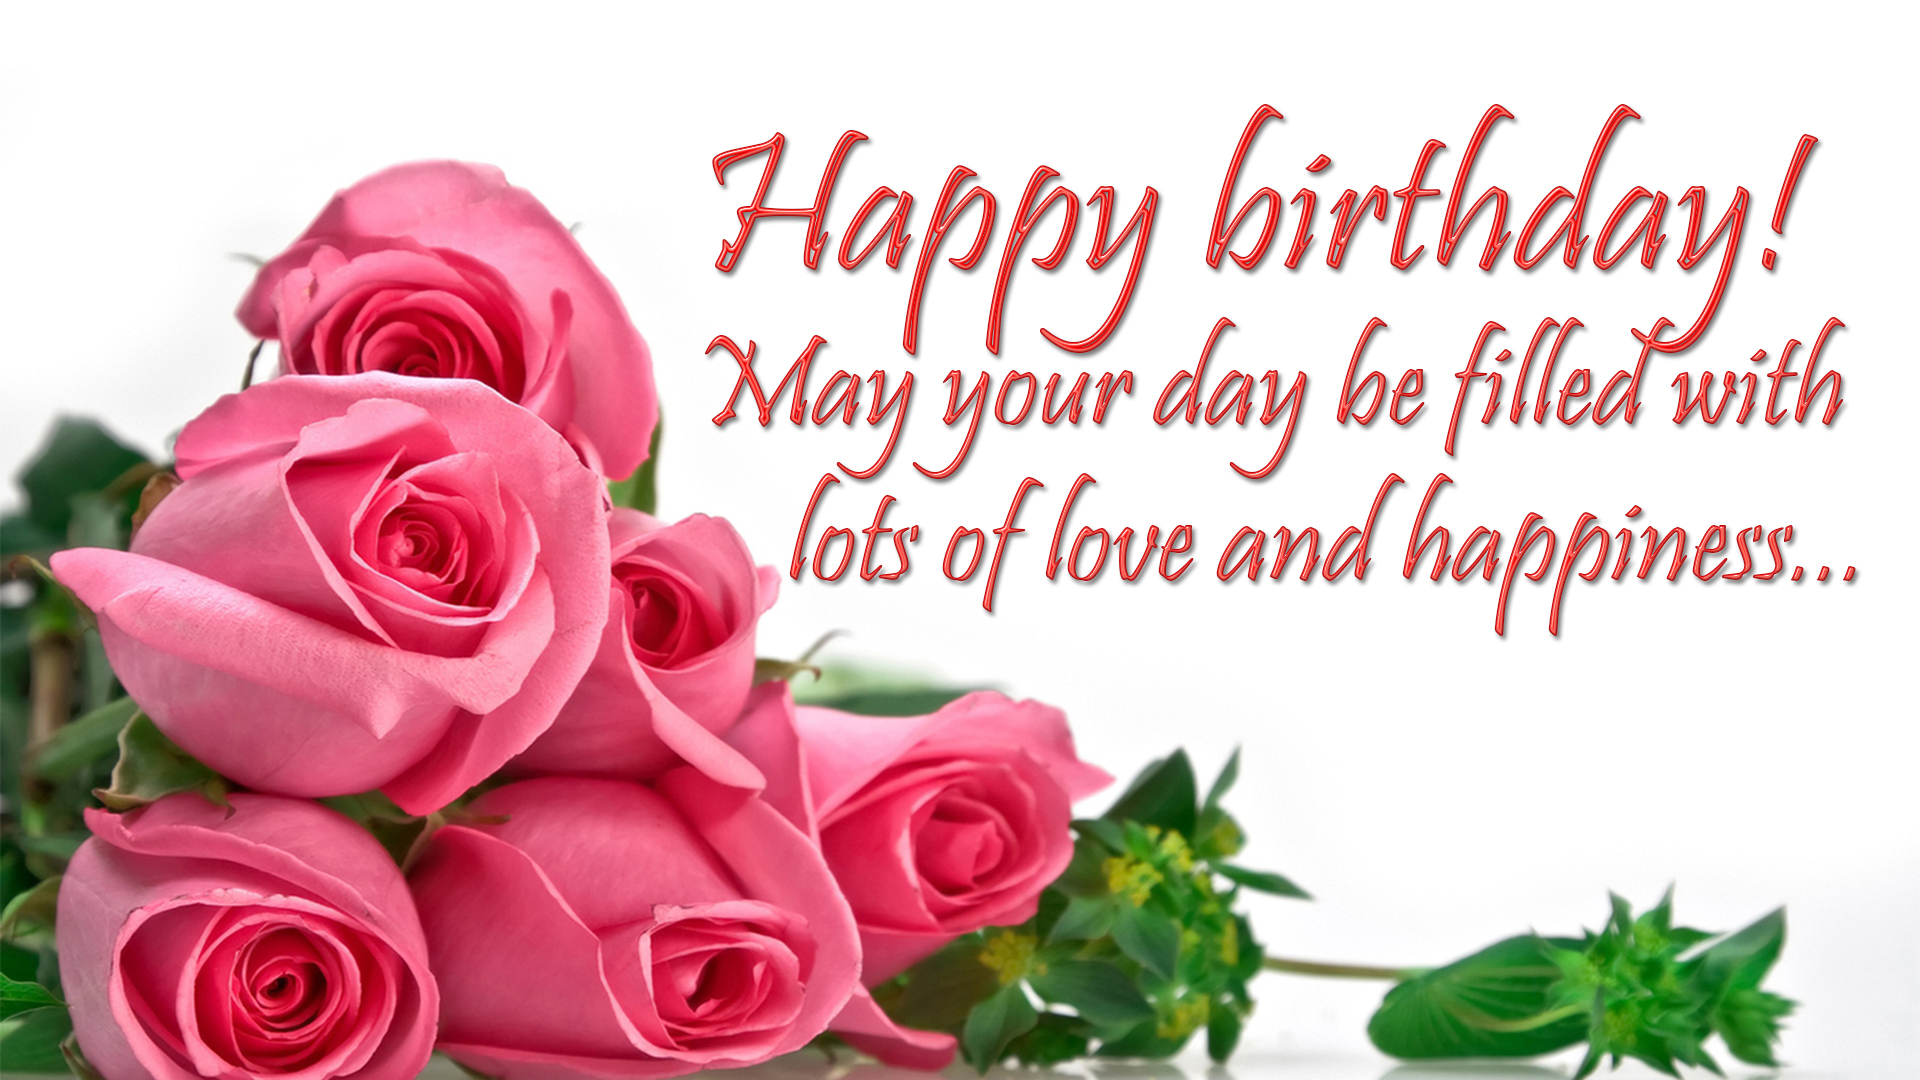 Happy Birthday Wishes Images | Latest Birthday Greeting Cards